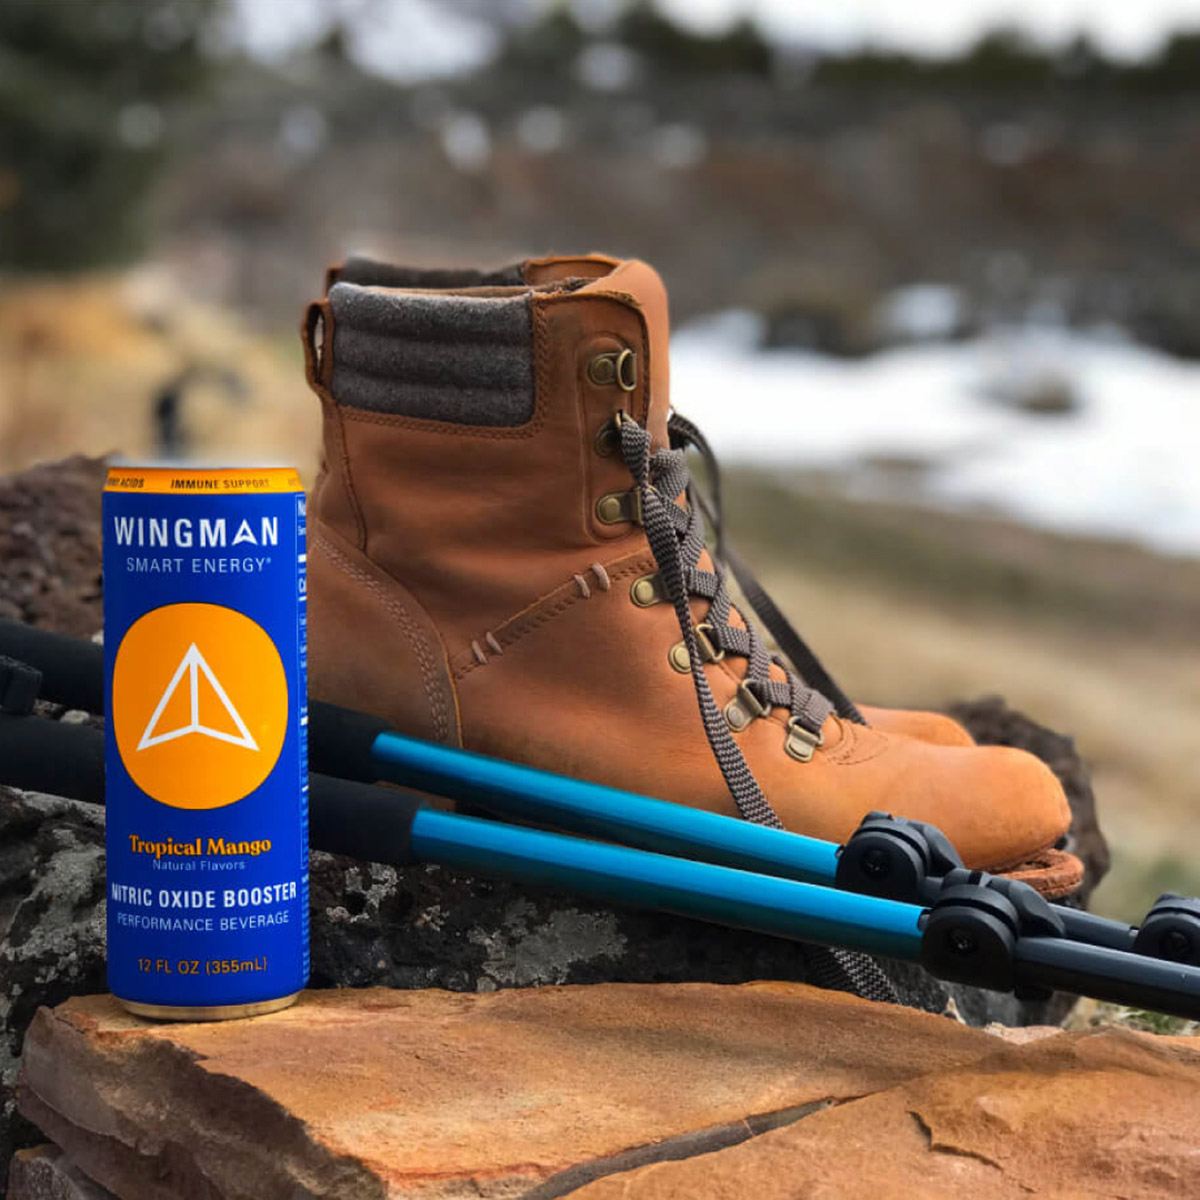 Wingman drink next to hiking boot and gear